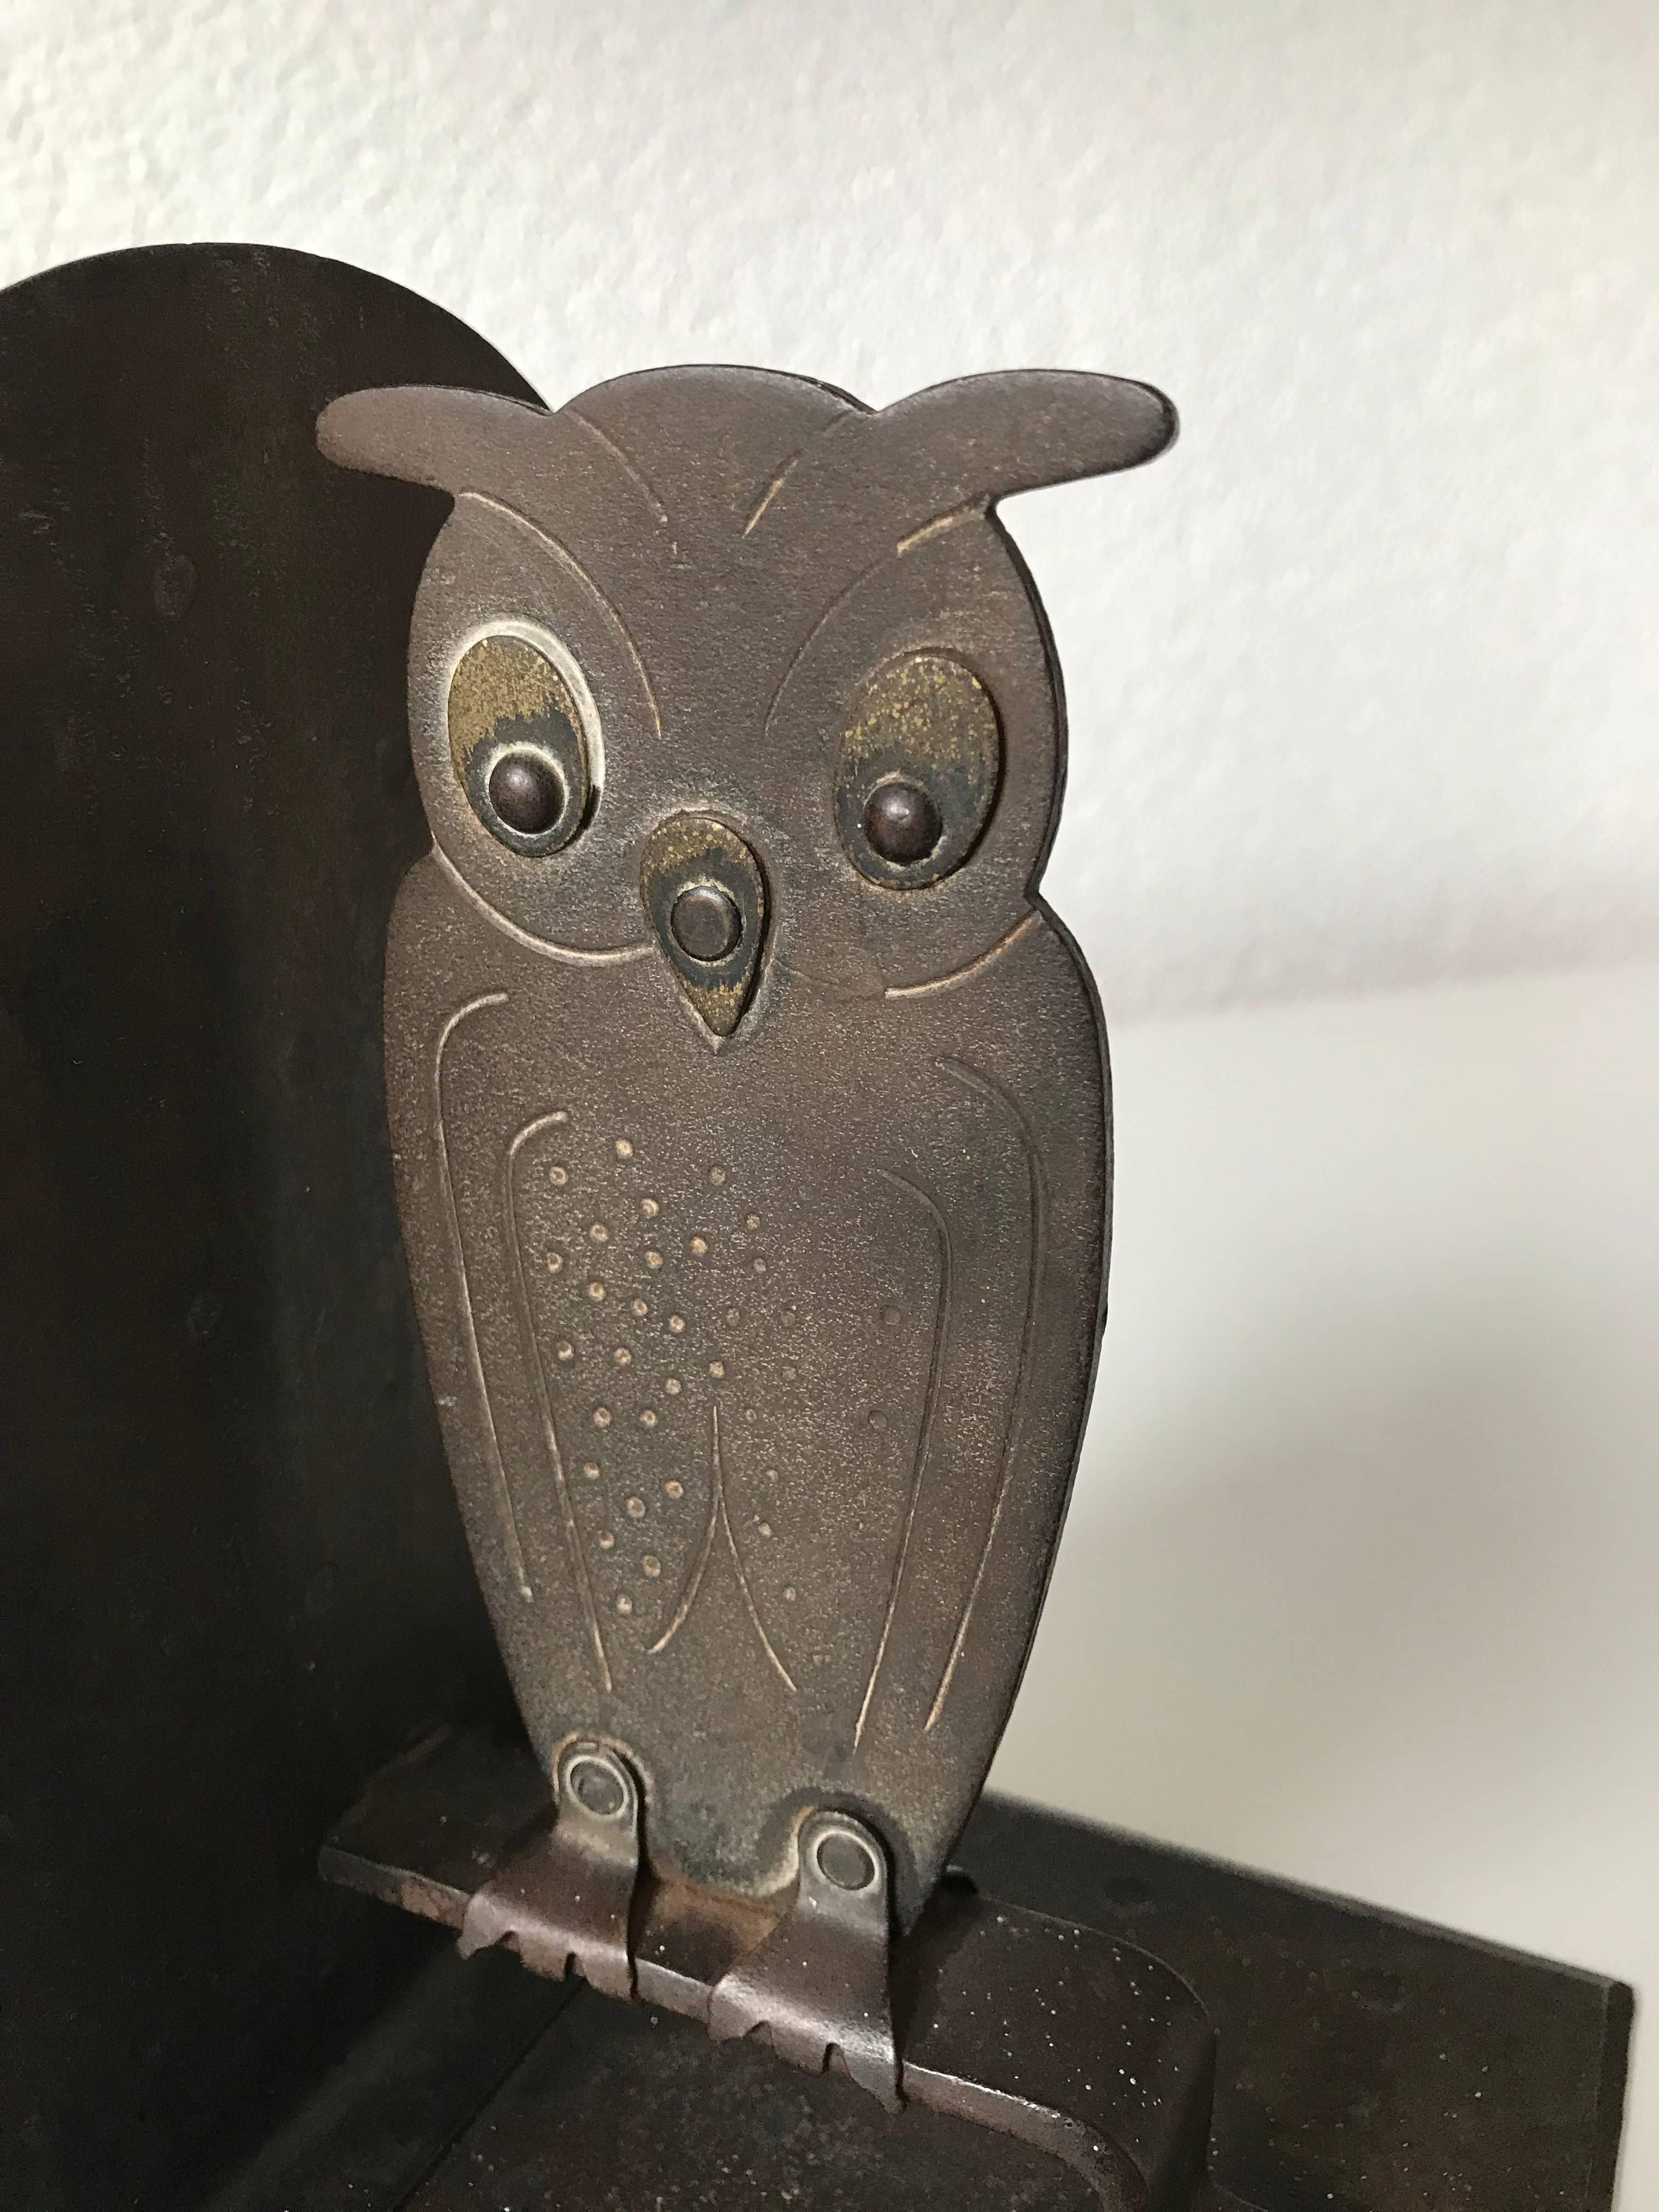 Artistic bookend by famous German metal worker.

This rare 'Goberg' bookend is in very good condition. This decorative bookend has two frontsides so you will always have the front of the owl to look at. It may be small in size, but this top